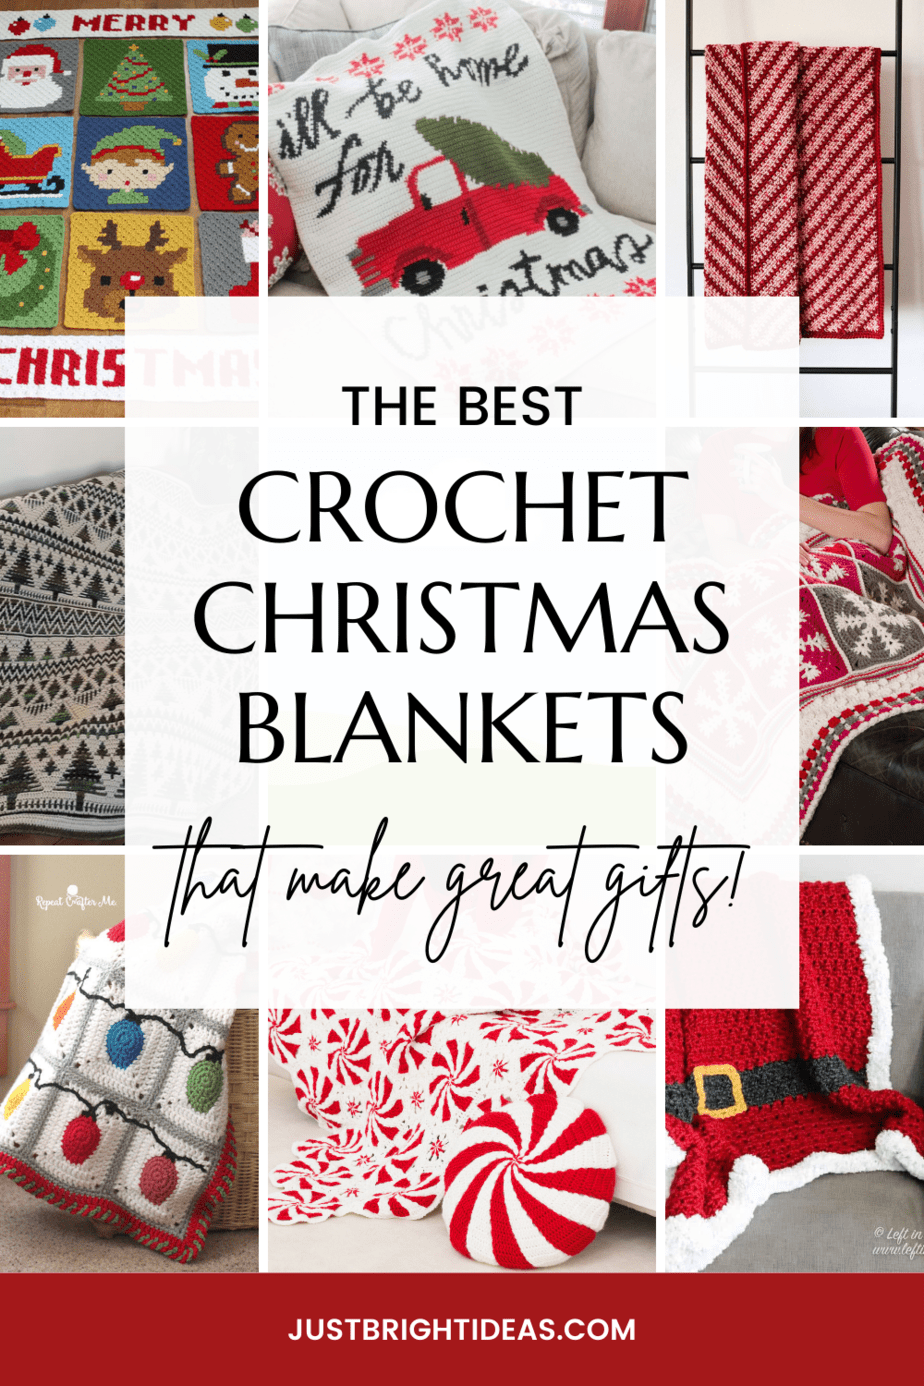 Text overlay reads "The Best Christmas Crochet Blankets that make great gifts". Images of festive afghans are behind to show what is in this collection of free and paid crochet patterns. 